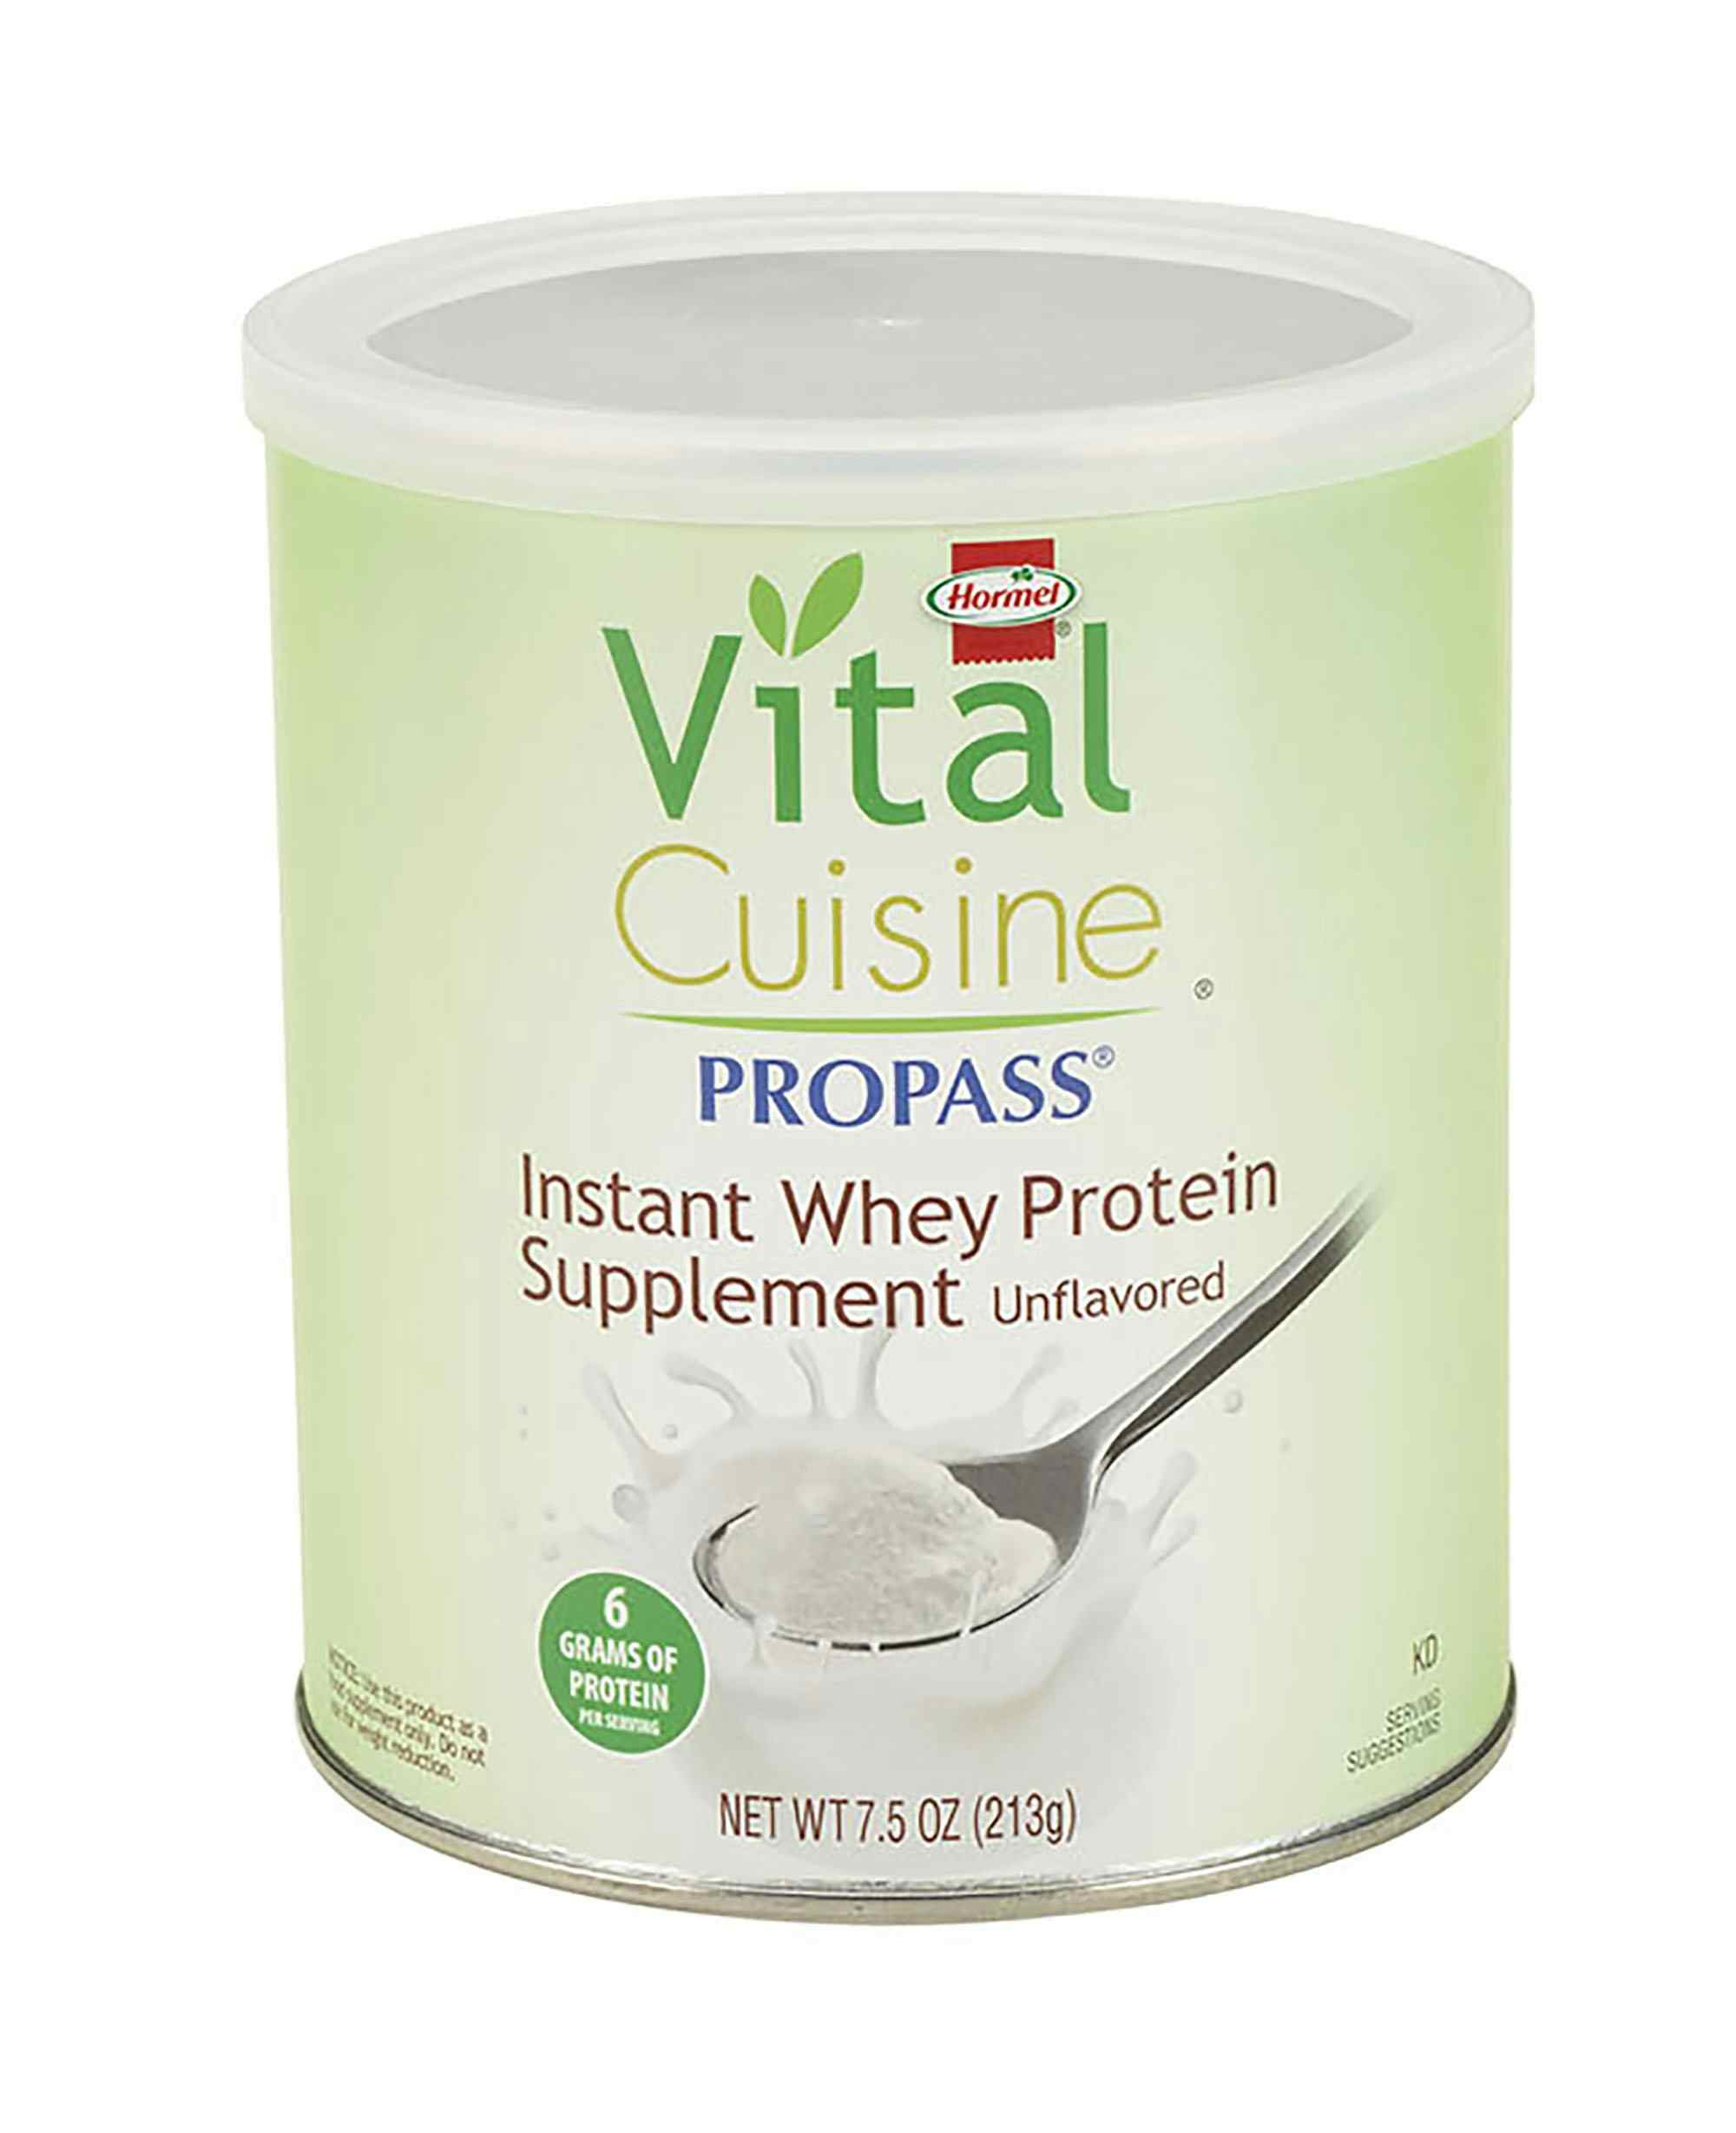  Vital Cuisine ProPass Oral Protein Supplement Whey Protein, Unflavored Powder, 7.5 oz., Can, 13126, 1 Can